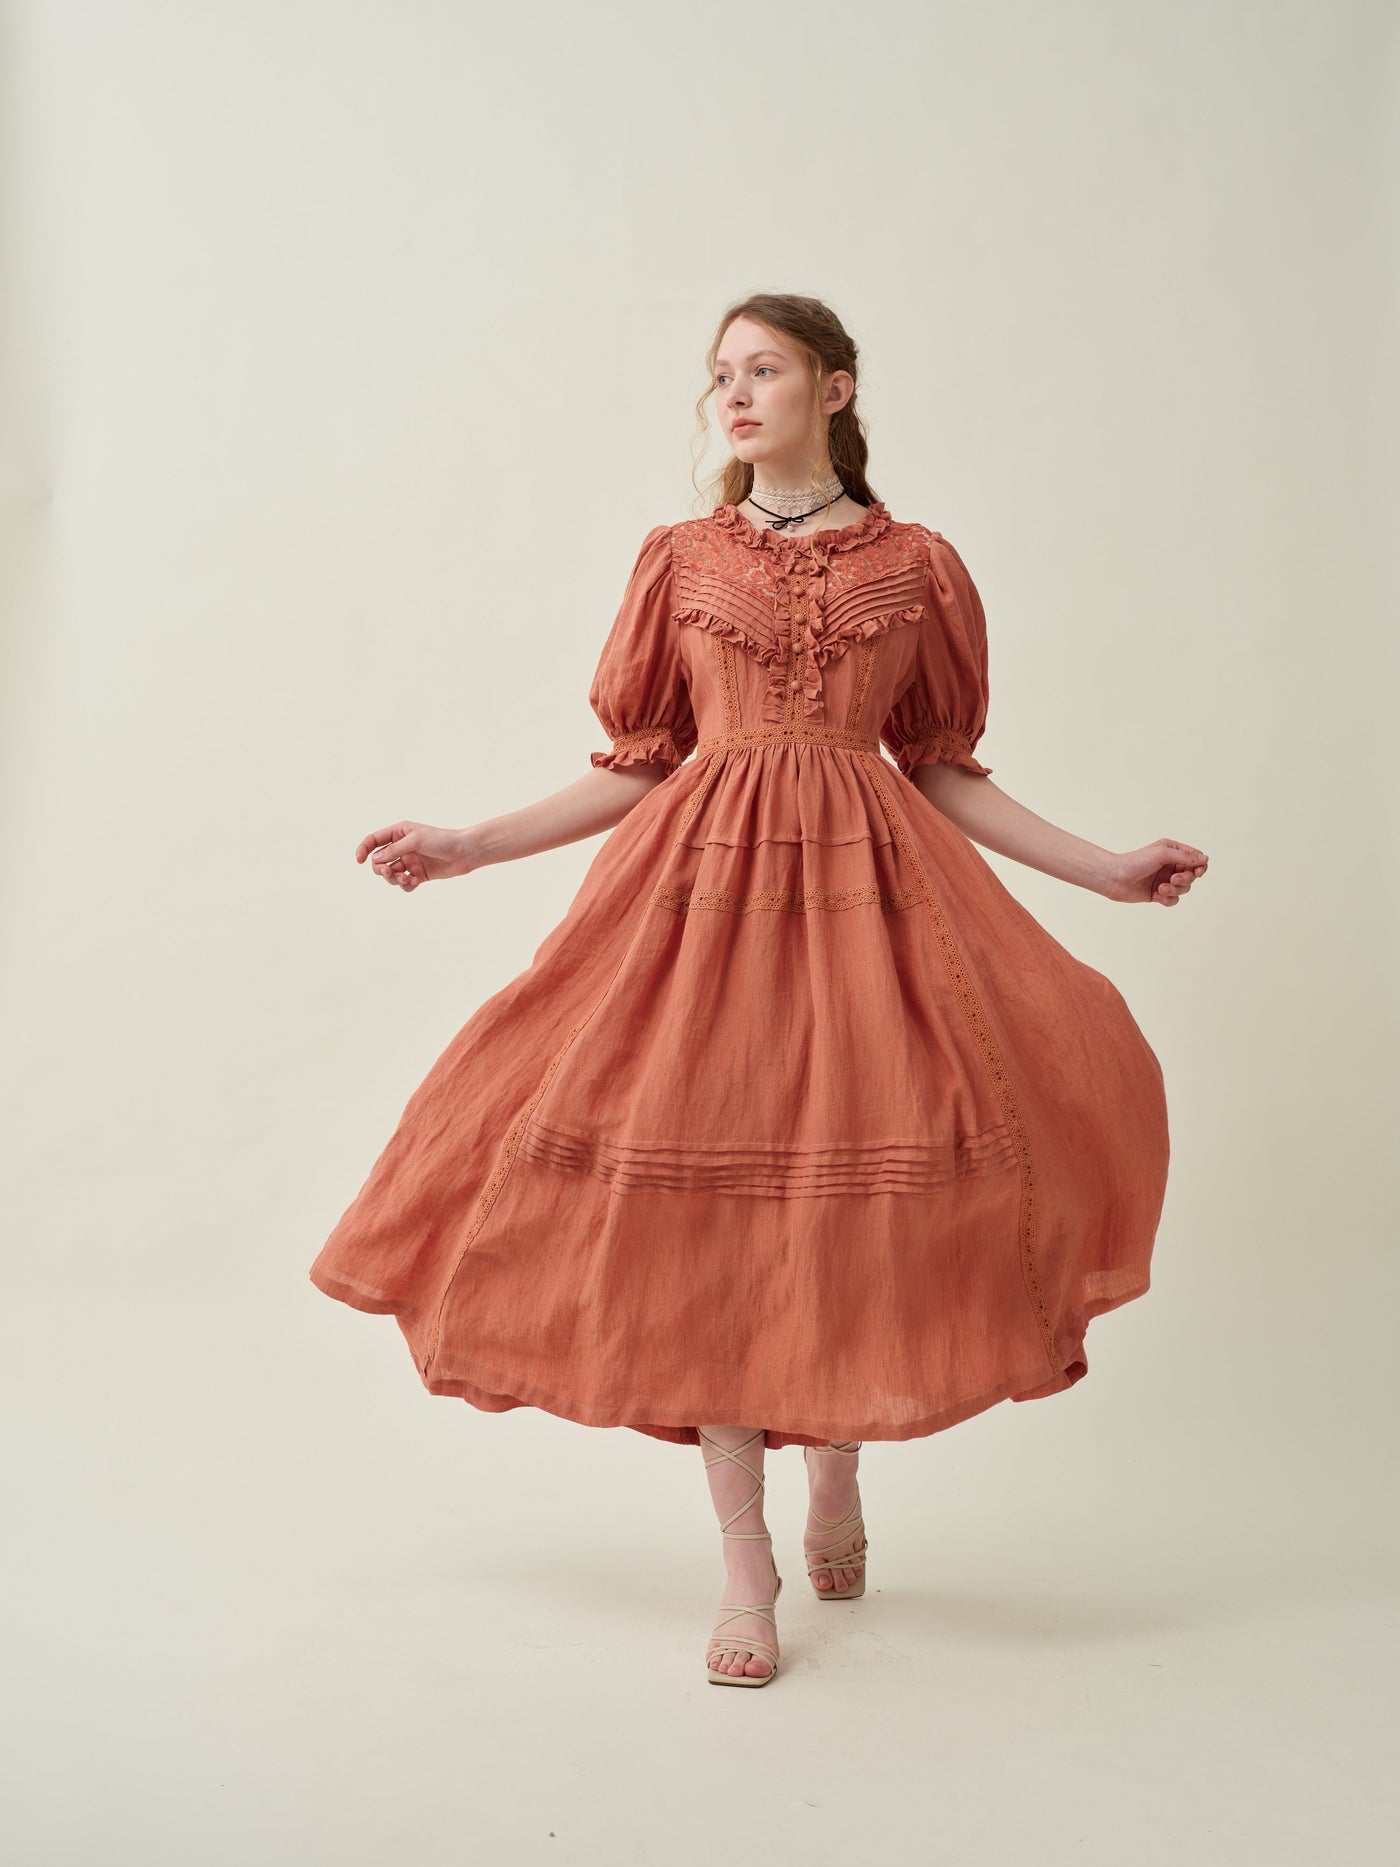 MARY 18 | VINTAGE LINEN DRESS GOWN